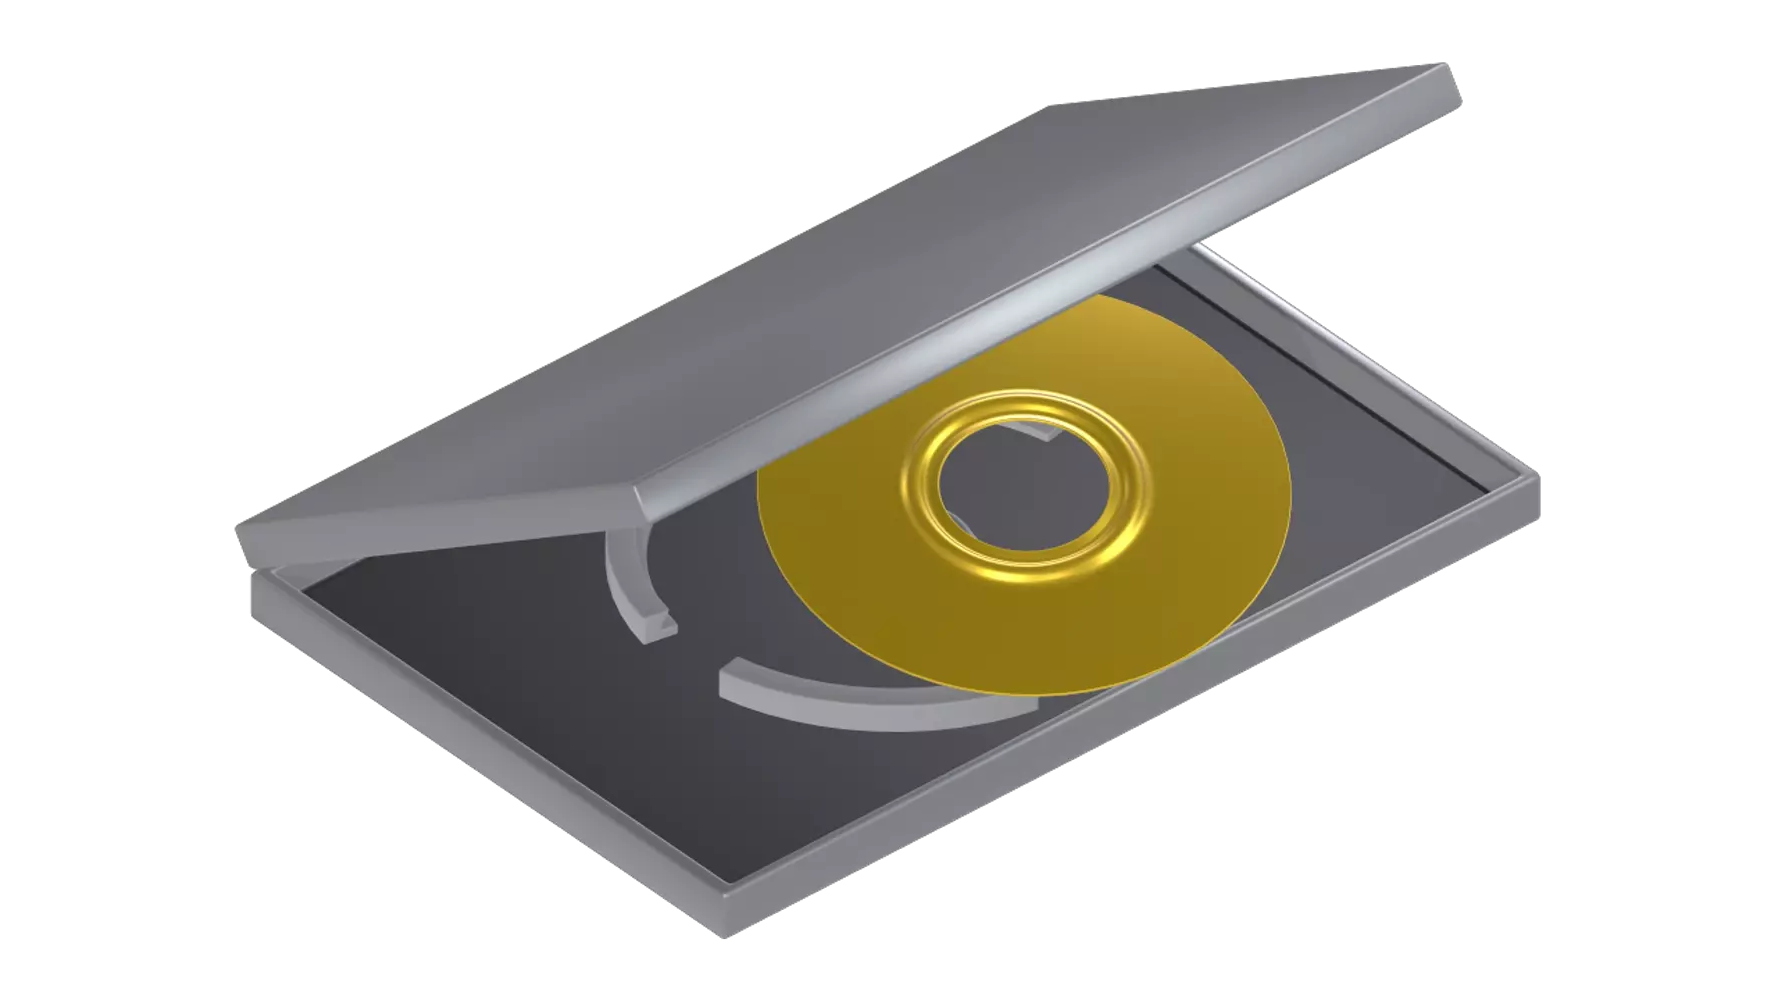 Game Disk 3D Graphic